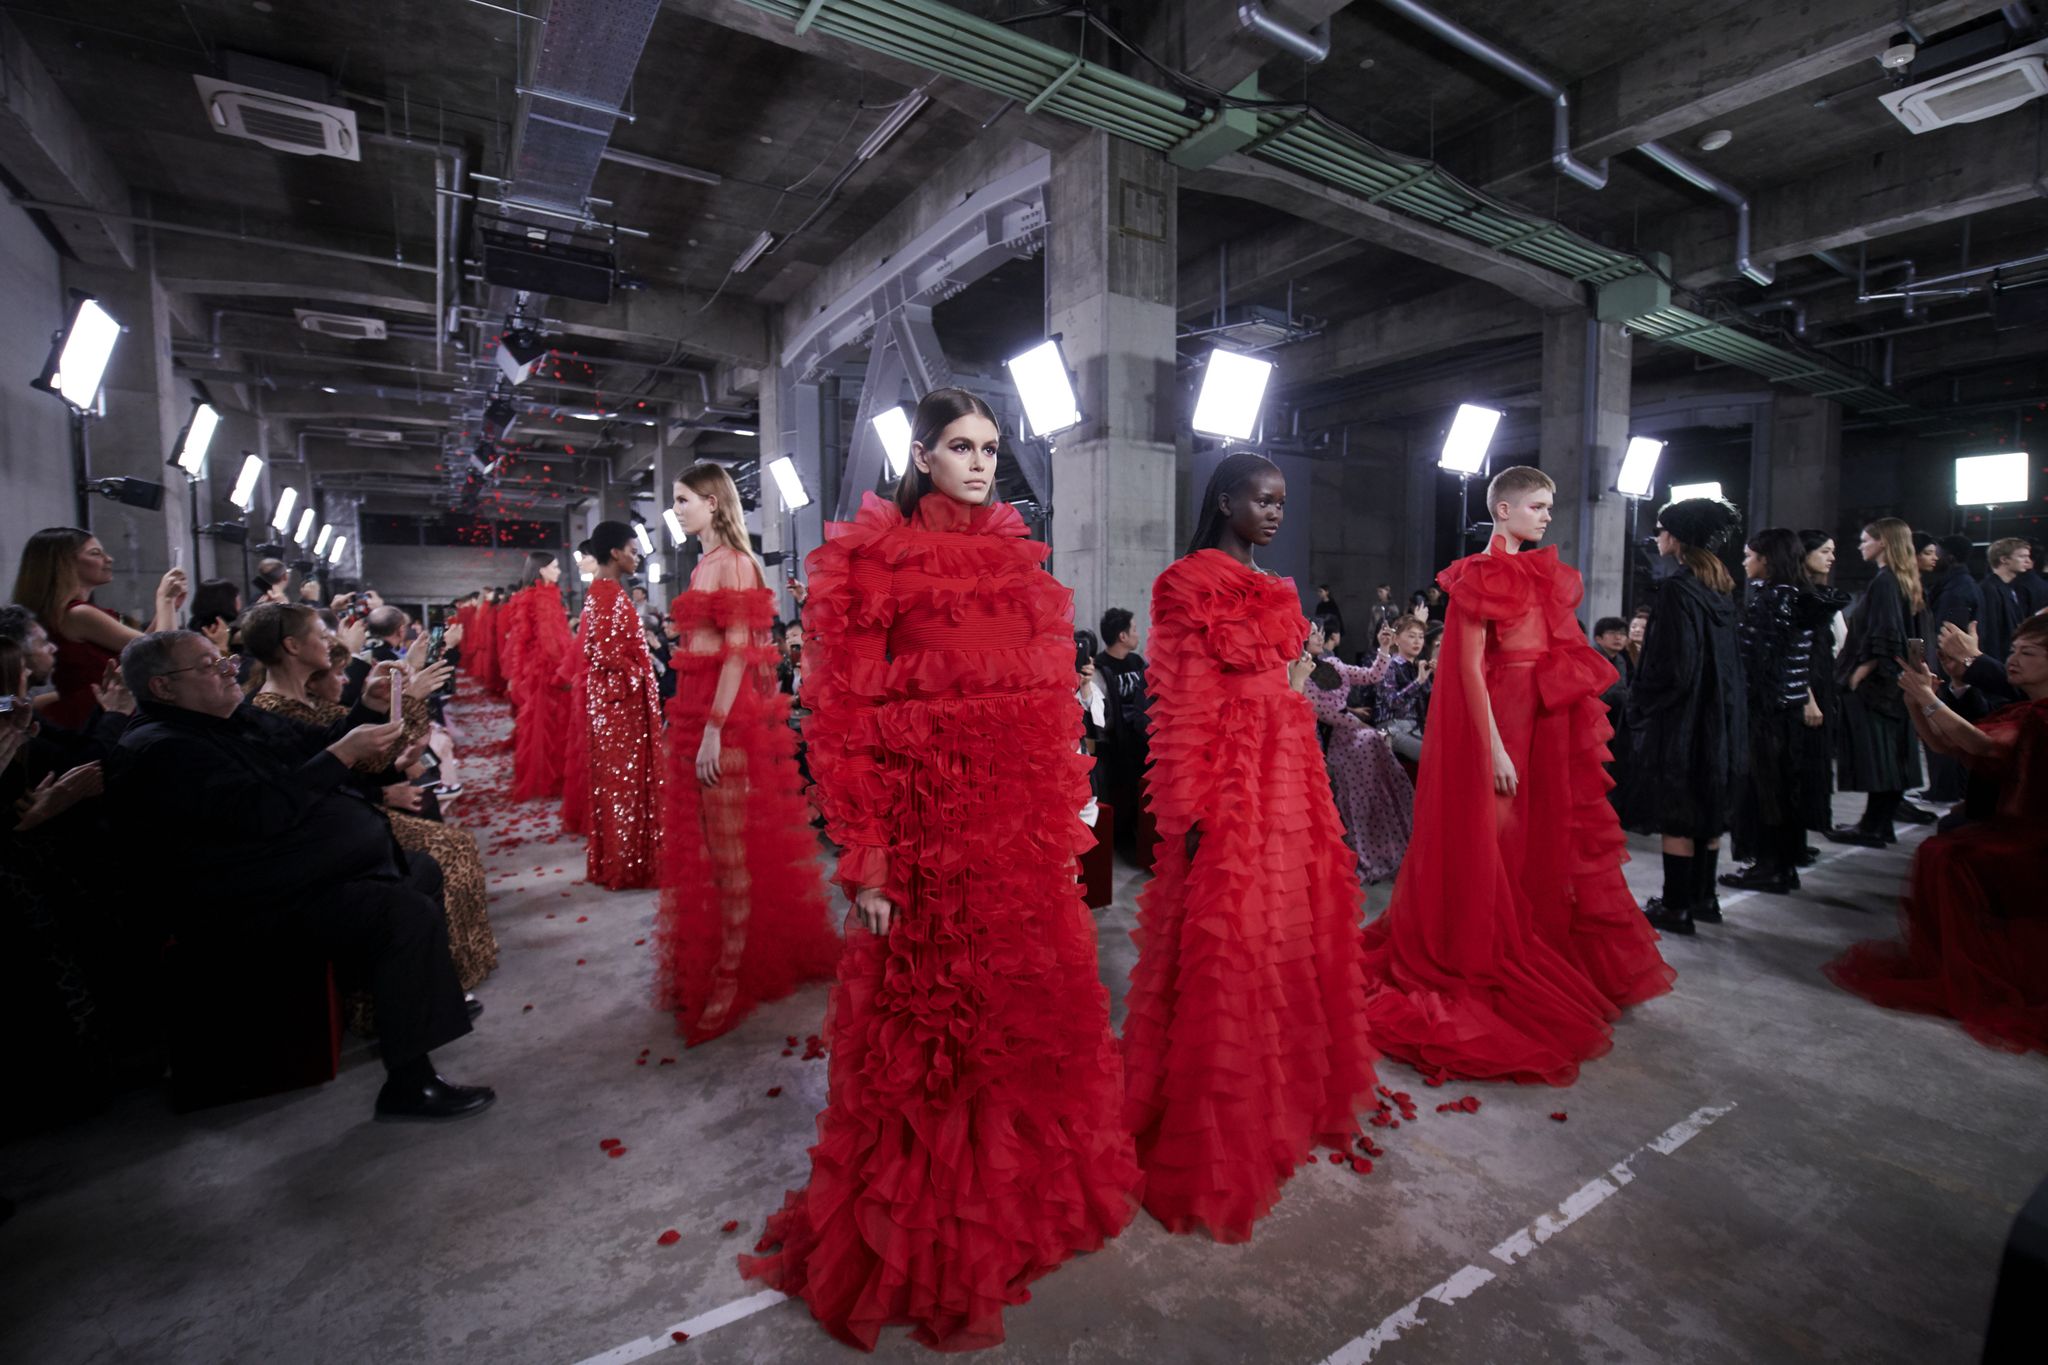 Red, Fashion, Haute couture, Event, Dress, Tradition, Fashion design, Gown, Crowd, 